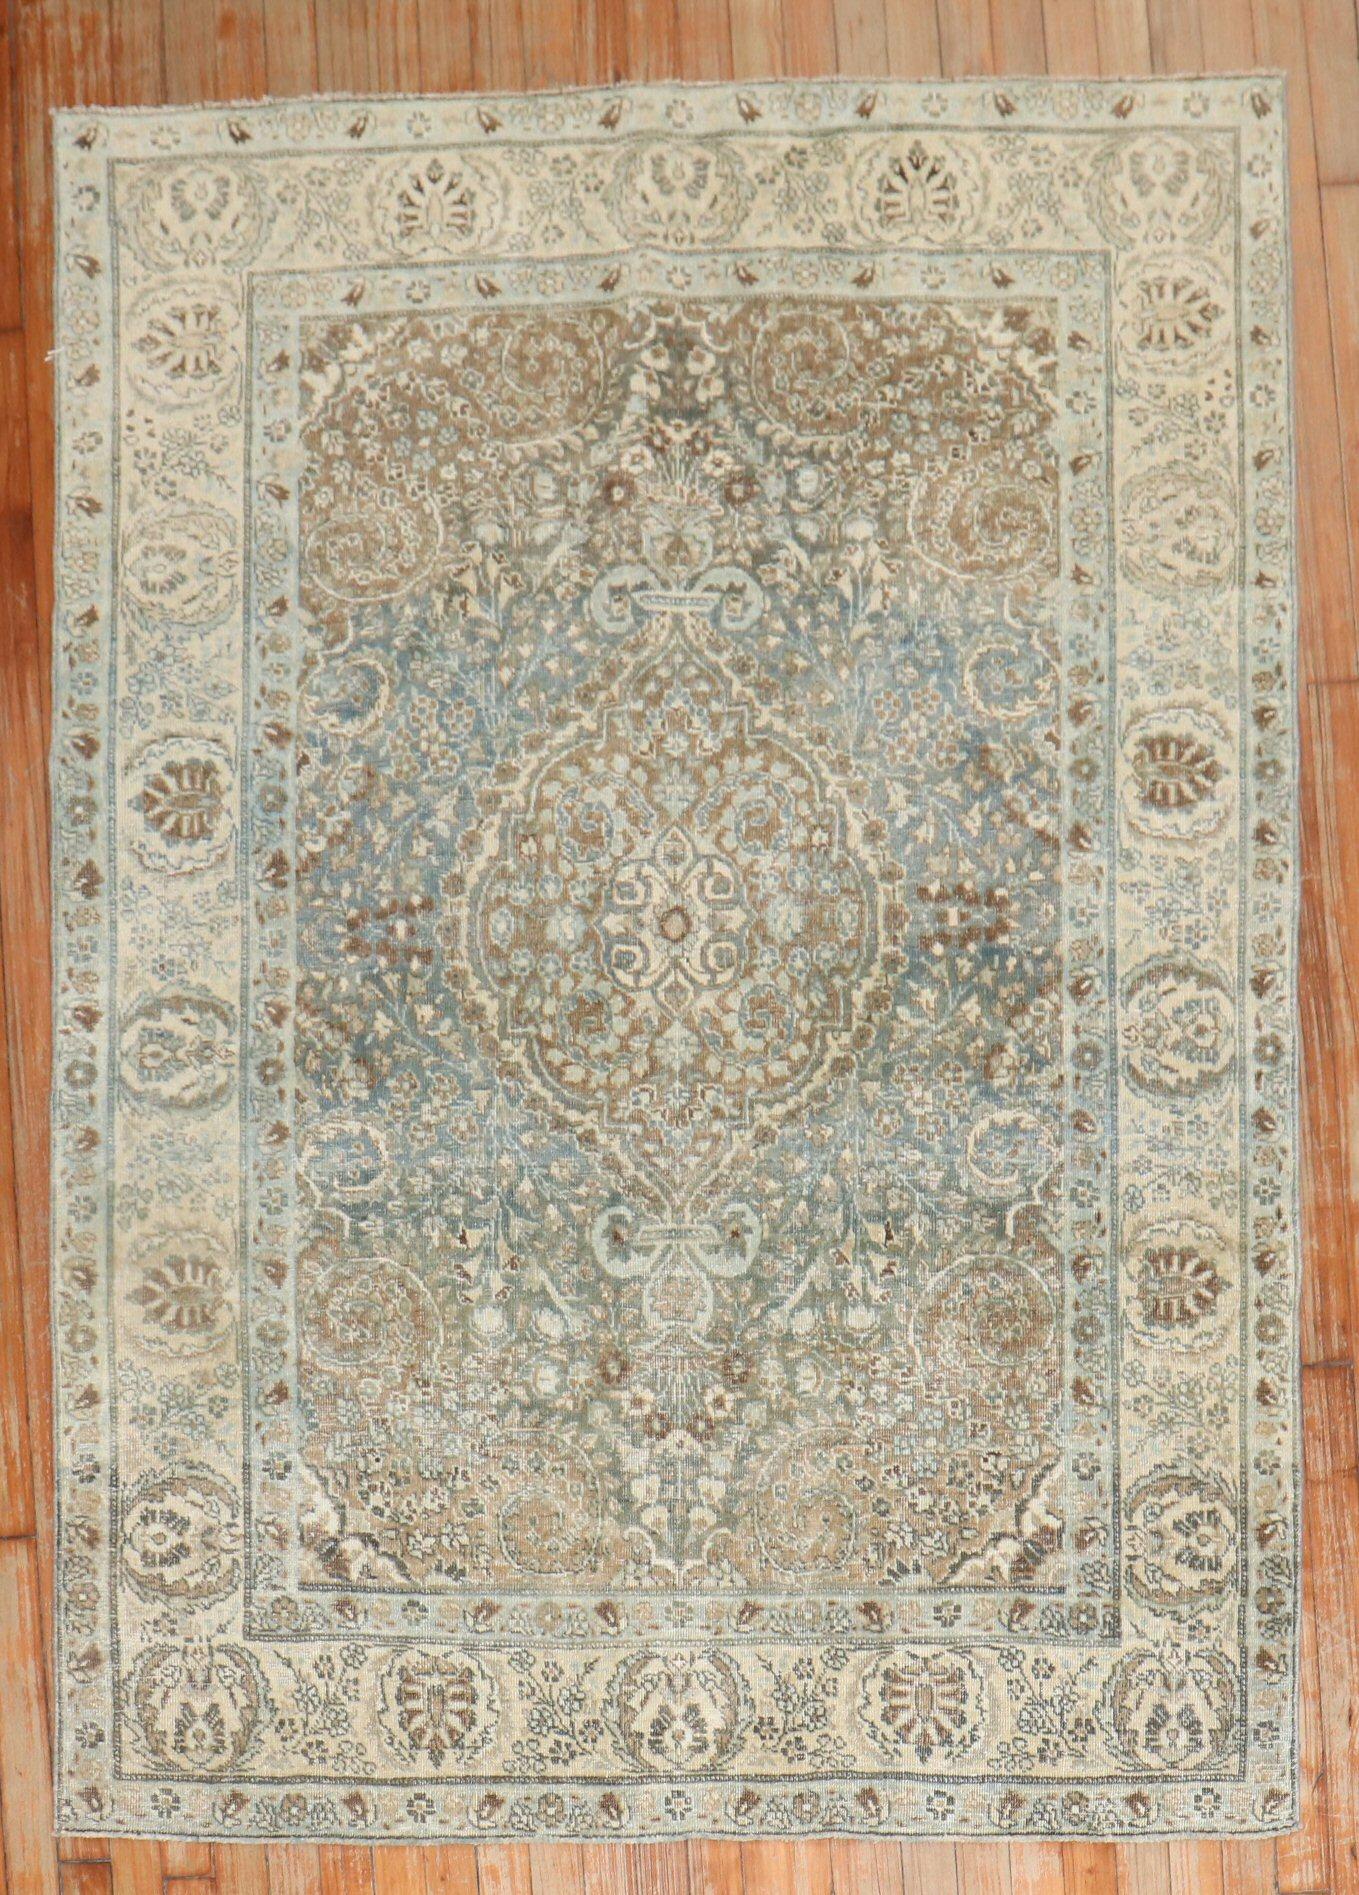 1st quarter of the 20th century Persian Formal Tabriz rug in blue-green, beige and brown.

Measures: 4.6'' x 6.2''.